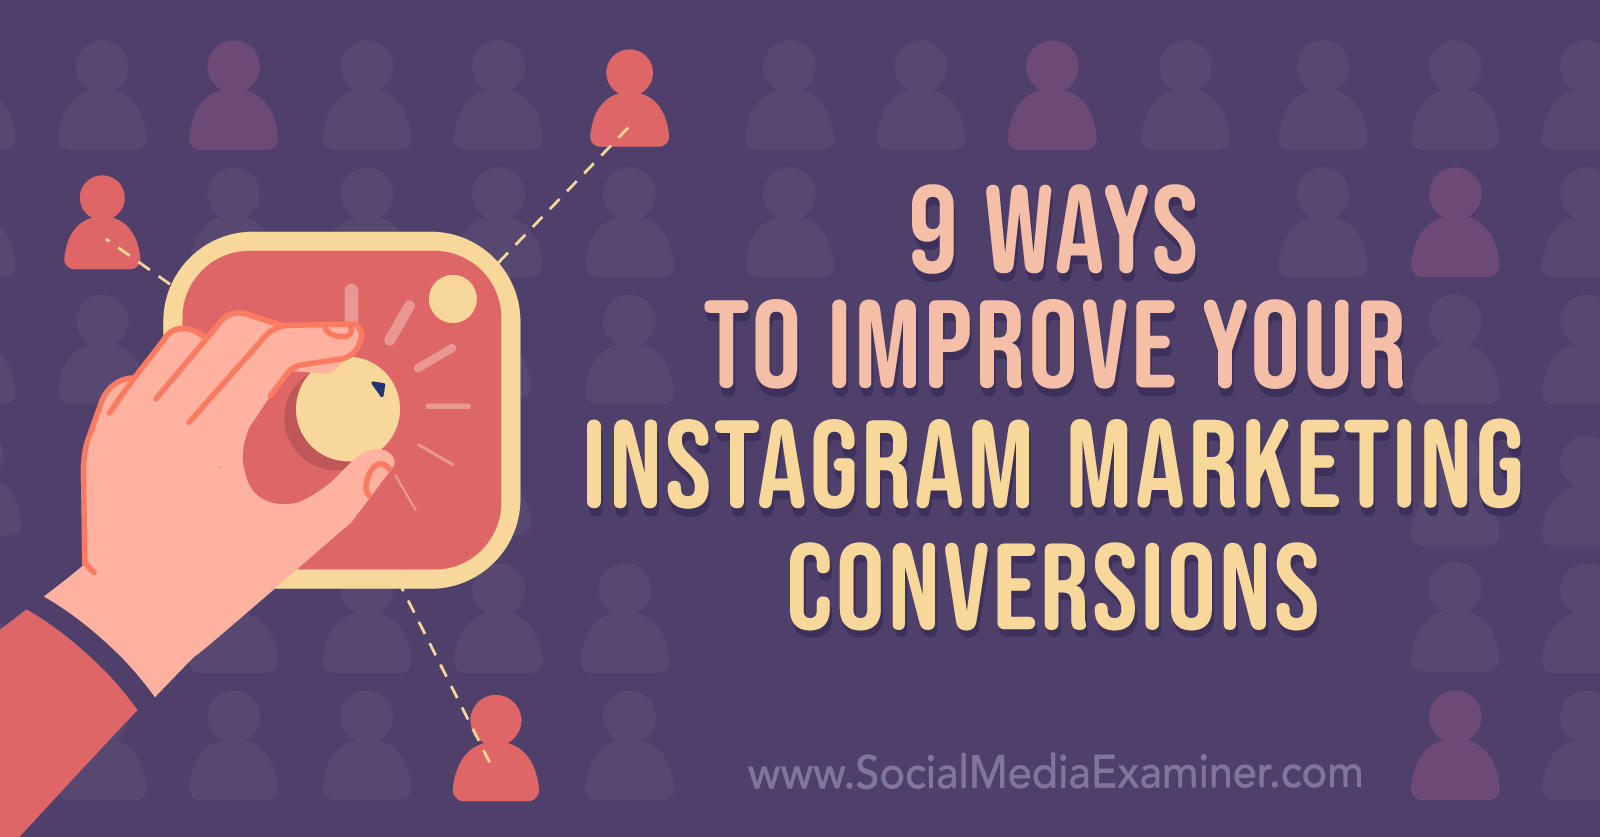 <img src="https://www.socialmediaexaminer.com/wp-content/uploads/2021/12/instagram-improve-conversions-how-to-1600.png" alt="9 Ways to Improve Your Instagram Marketing Conversions by Anna Sonnenberg on Social Media Examiner." width="1600" />